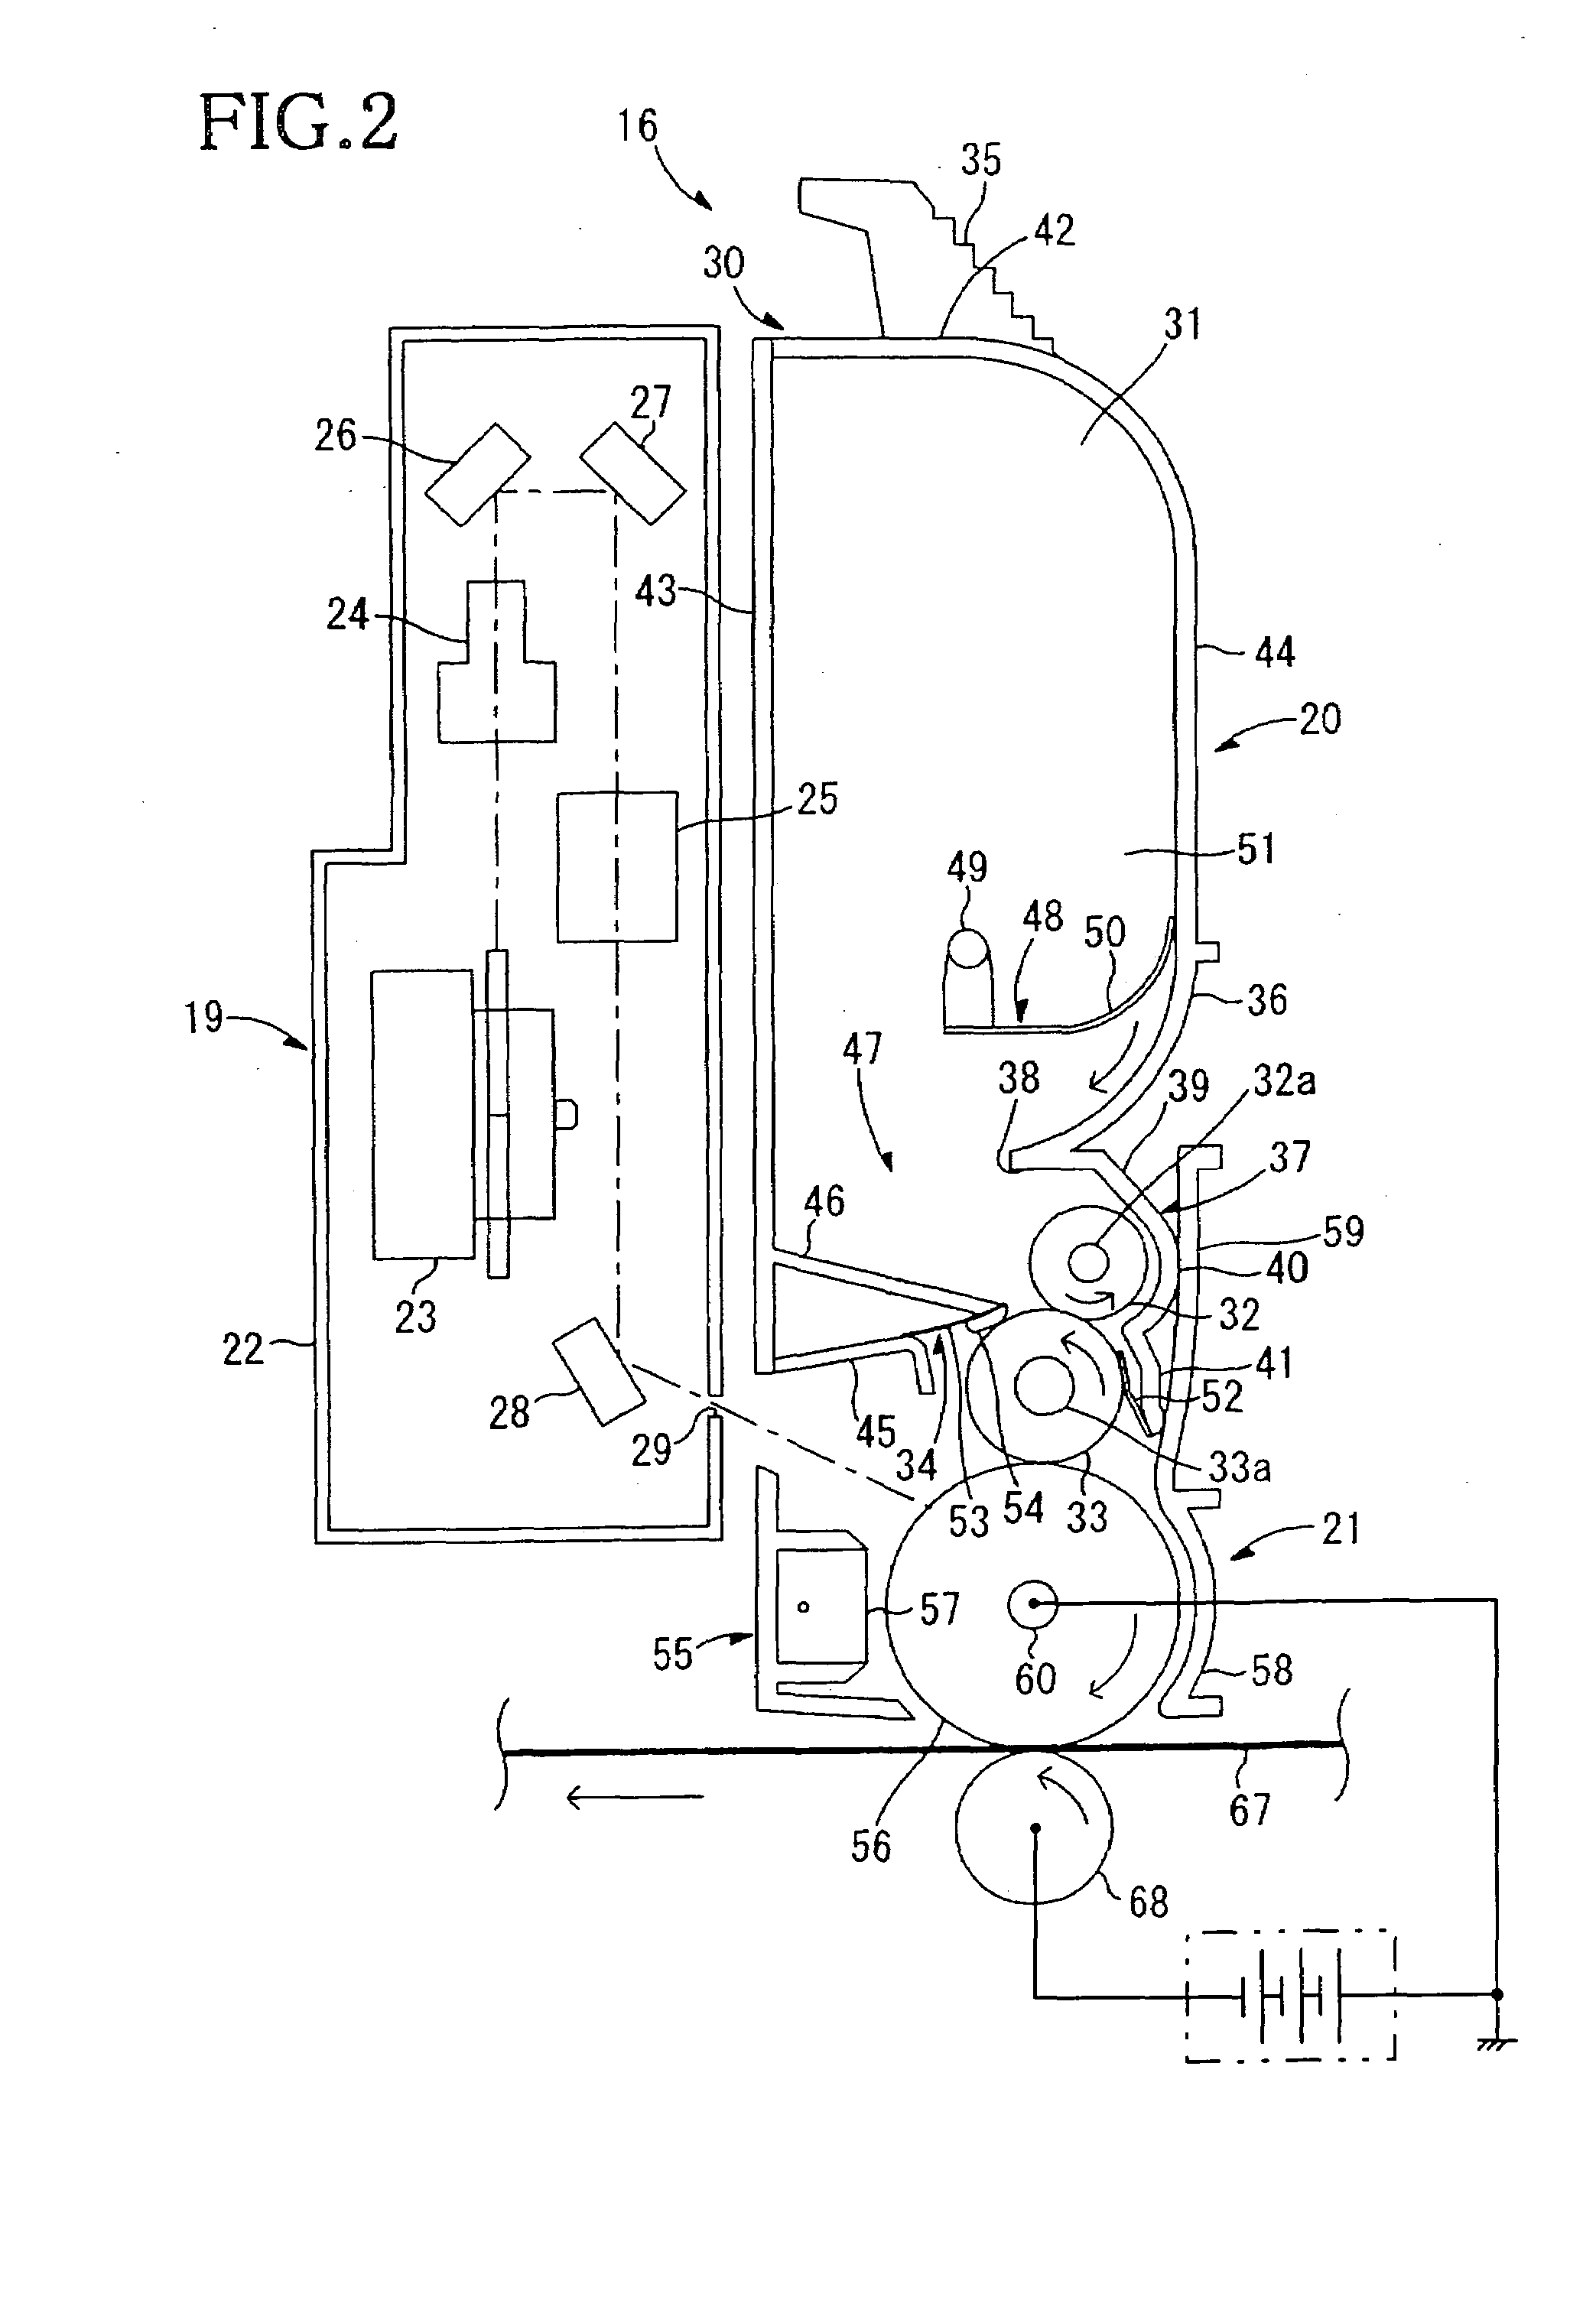 Image forming apparatus for a color laser printer for transferring a higher transfer efficiency on a recording sheet on the upstream side of the imaging forming process